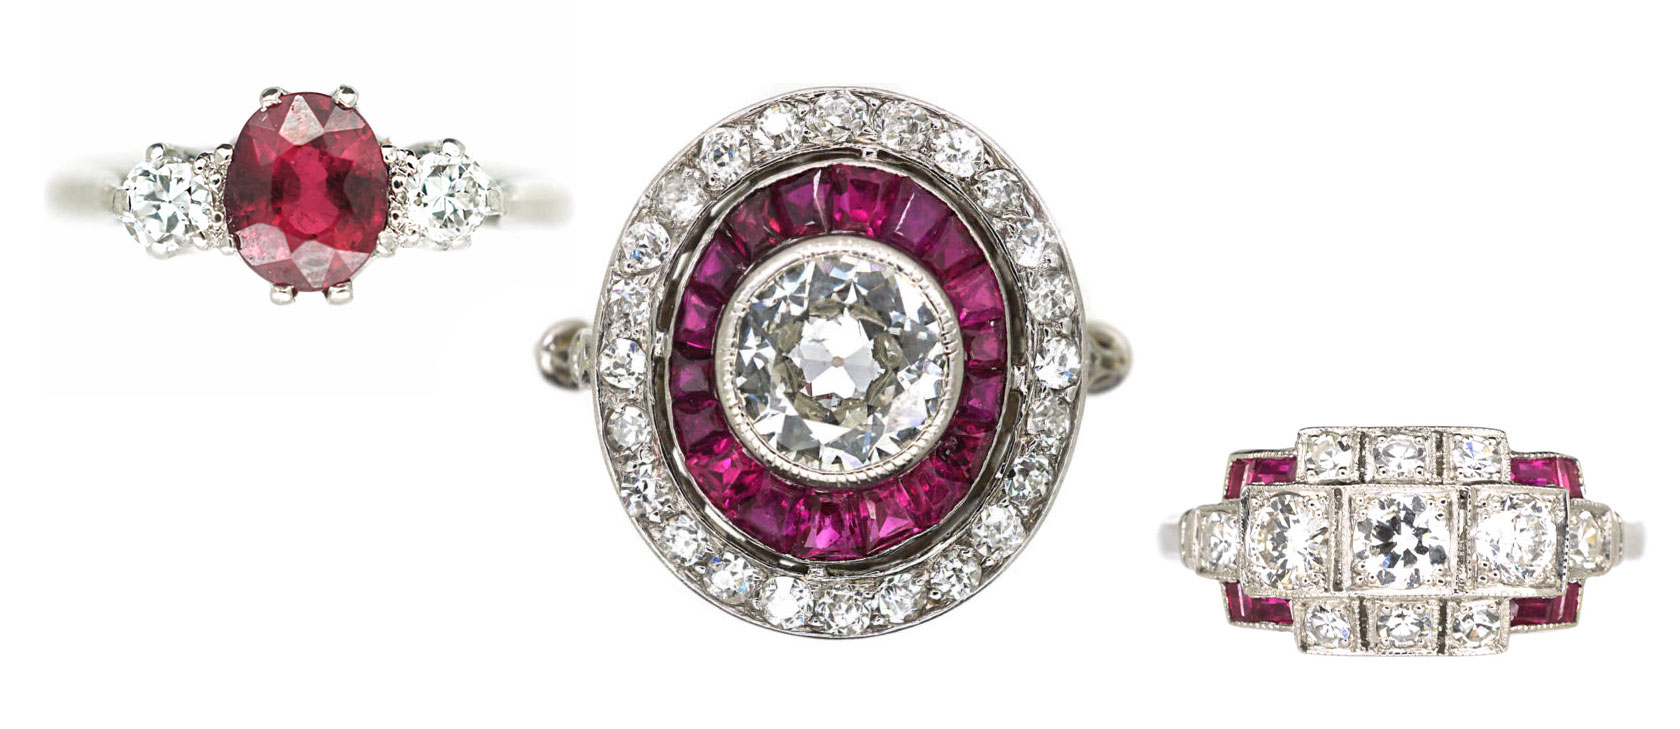 Antique ruby rings